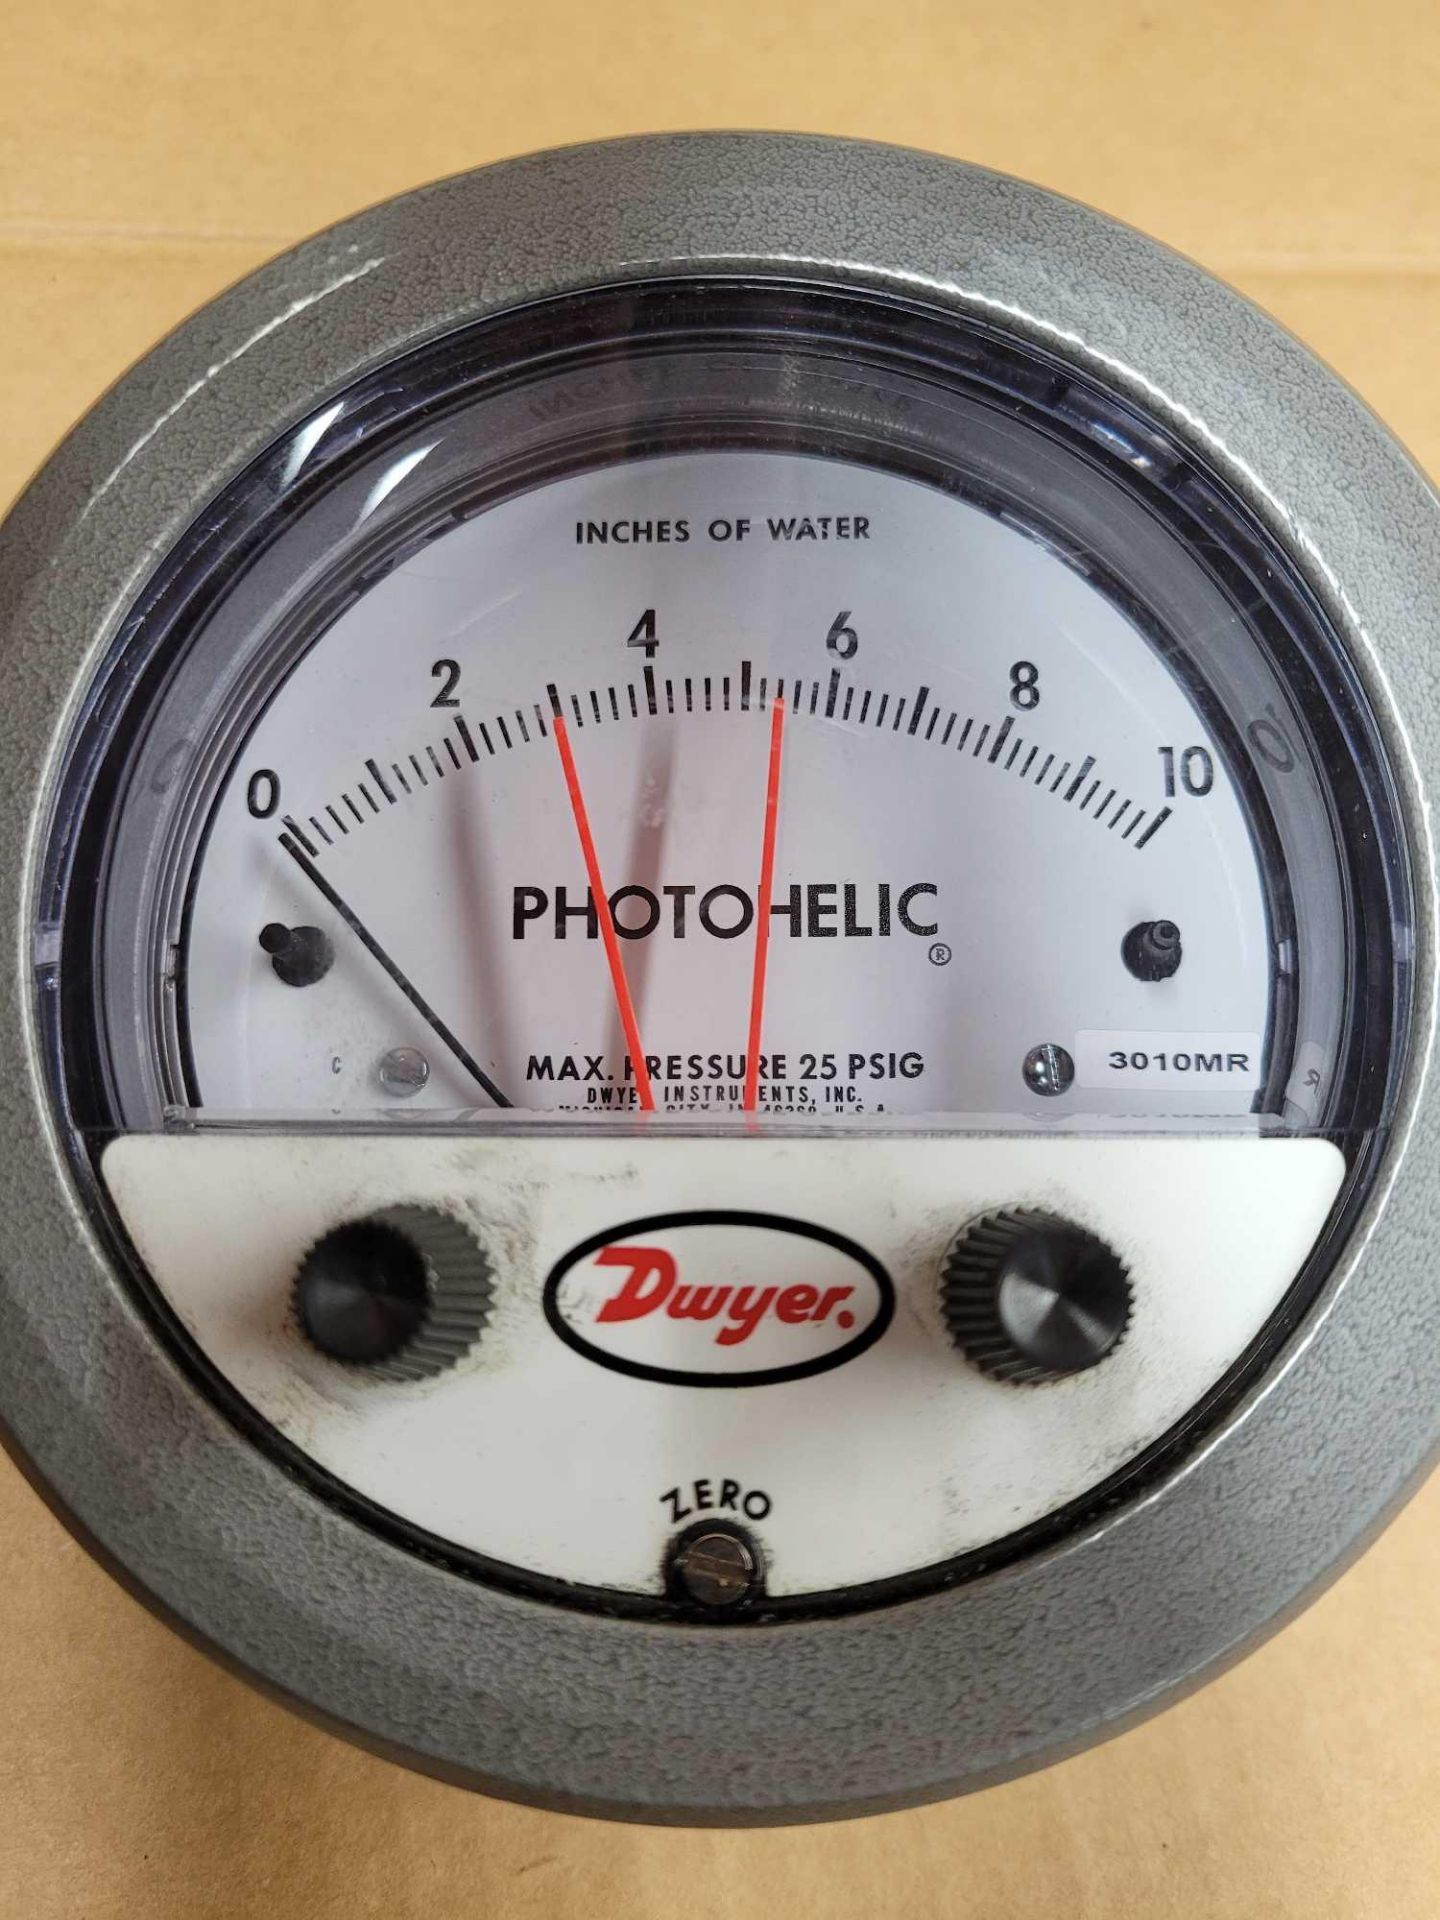 LOT OF 2 DWYER 3010MR / Series 3000MR 0-10" Photohelic Gauge  /  Lot Weight: 3.6 lbs - Image 3 of 6